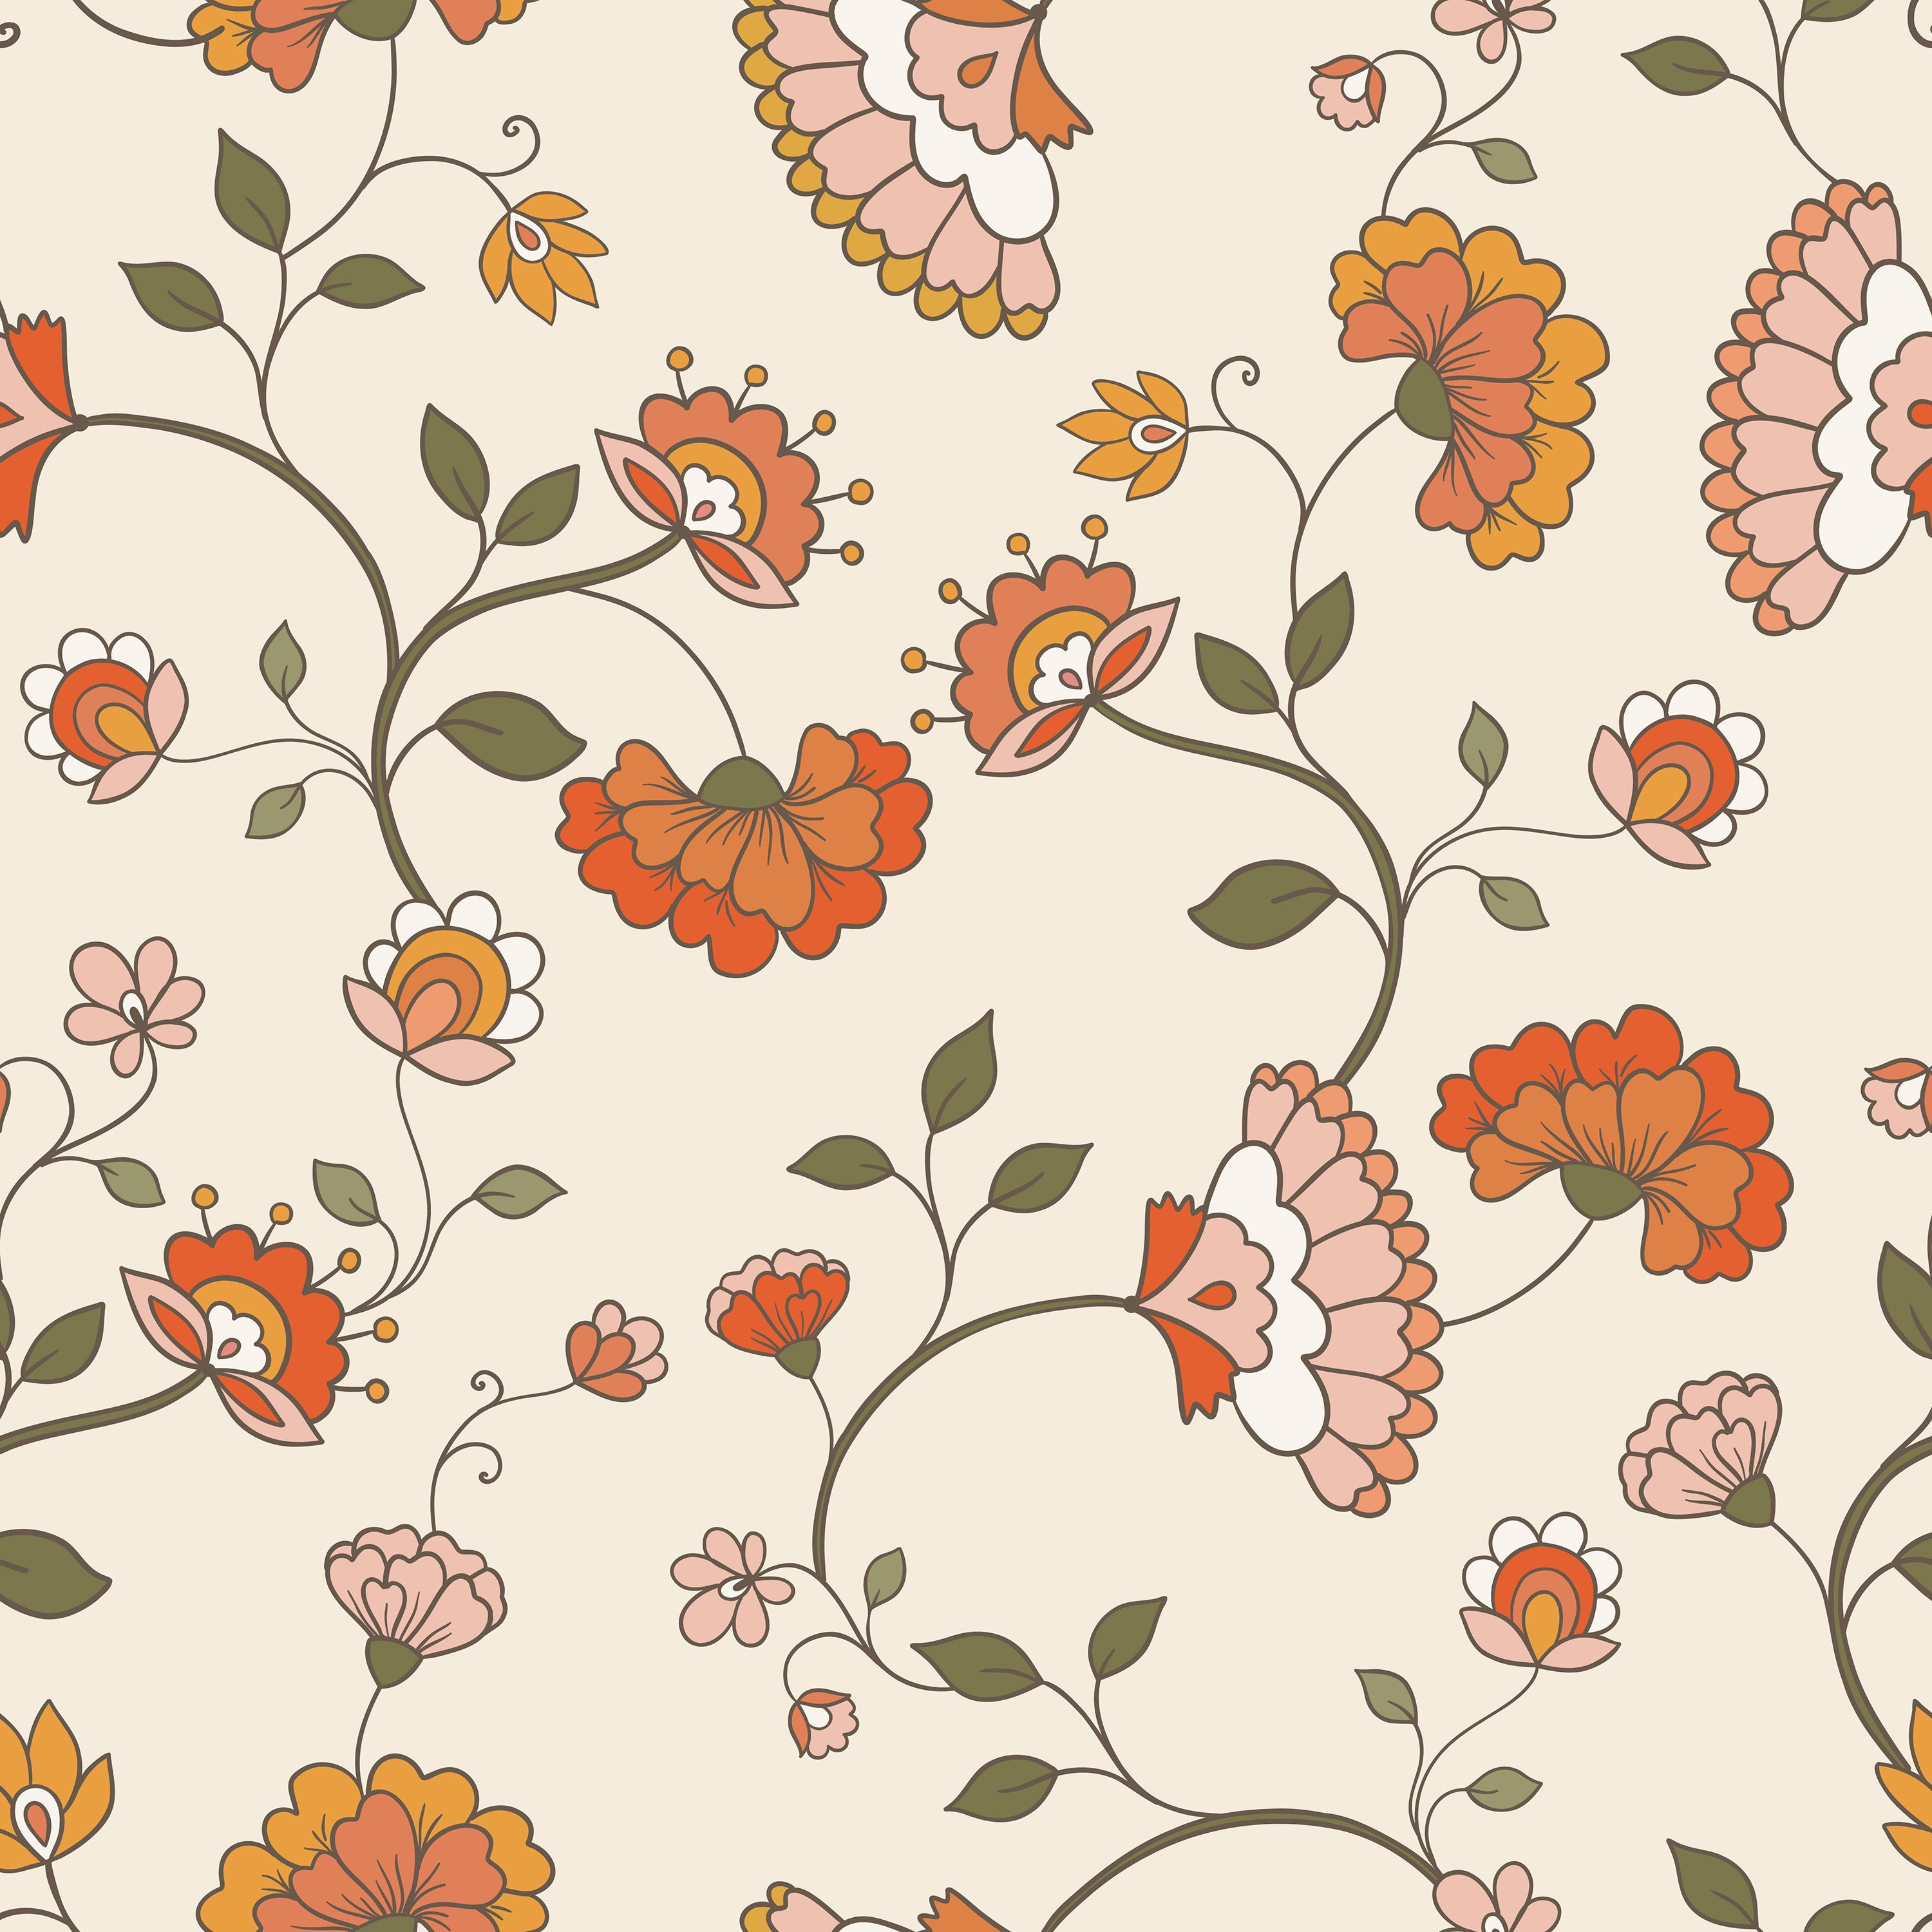 A close-up view of Retro Pattern Wallpaper, with a detailed floral pattern consisting of stylized orange and pink flowers connected by flowing green stems and leaves on a pale background.